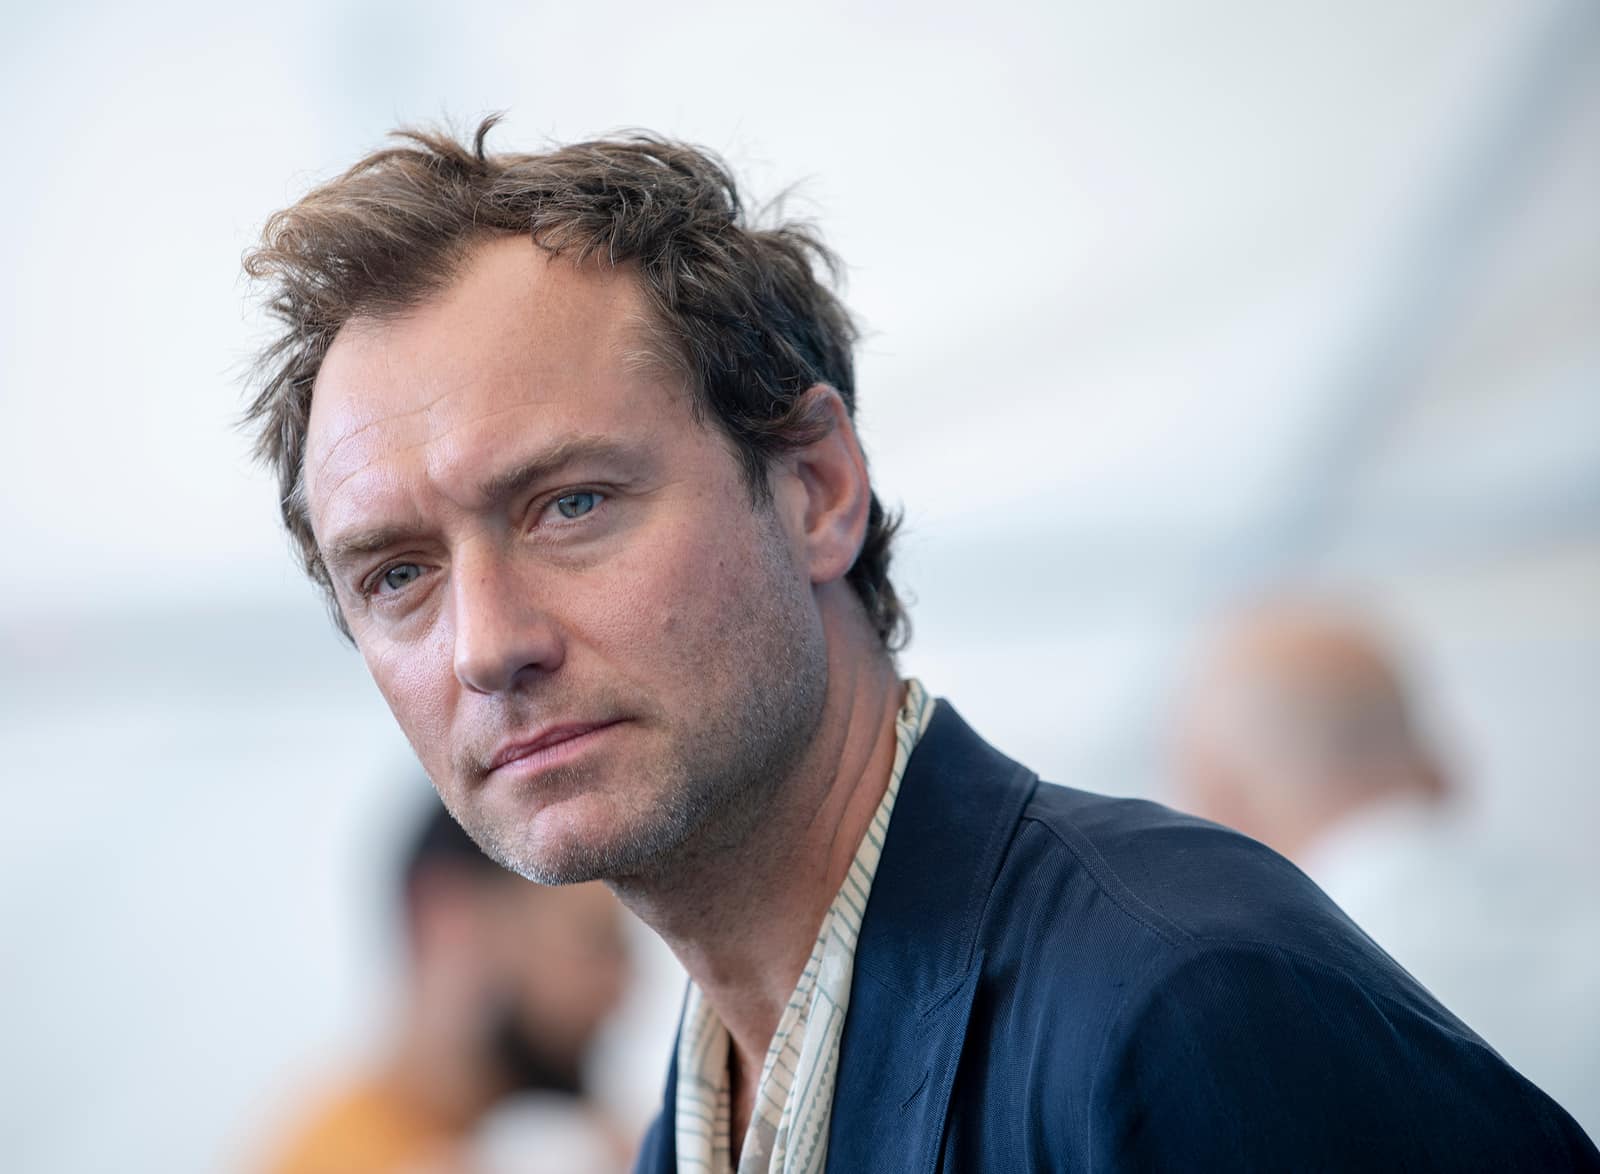 Jude Law attends "The New Pope" Top Streaming Shows for 2020